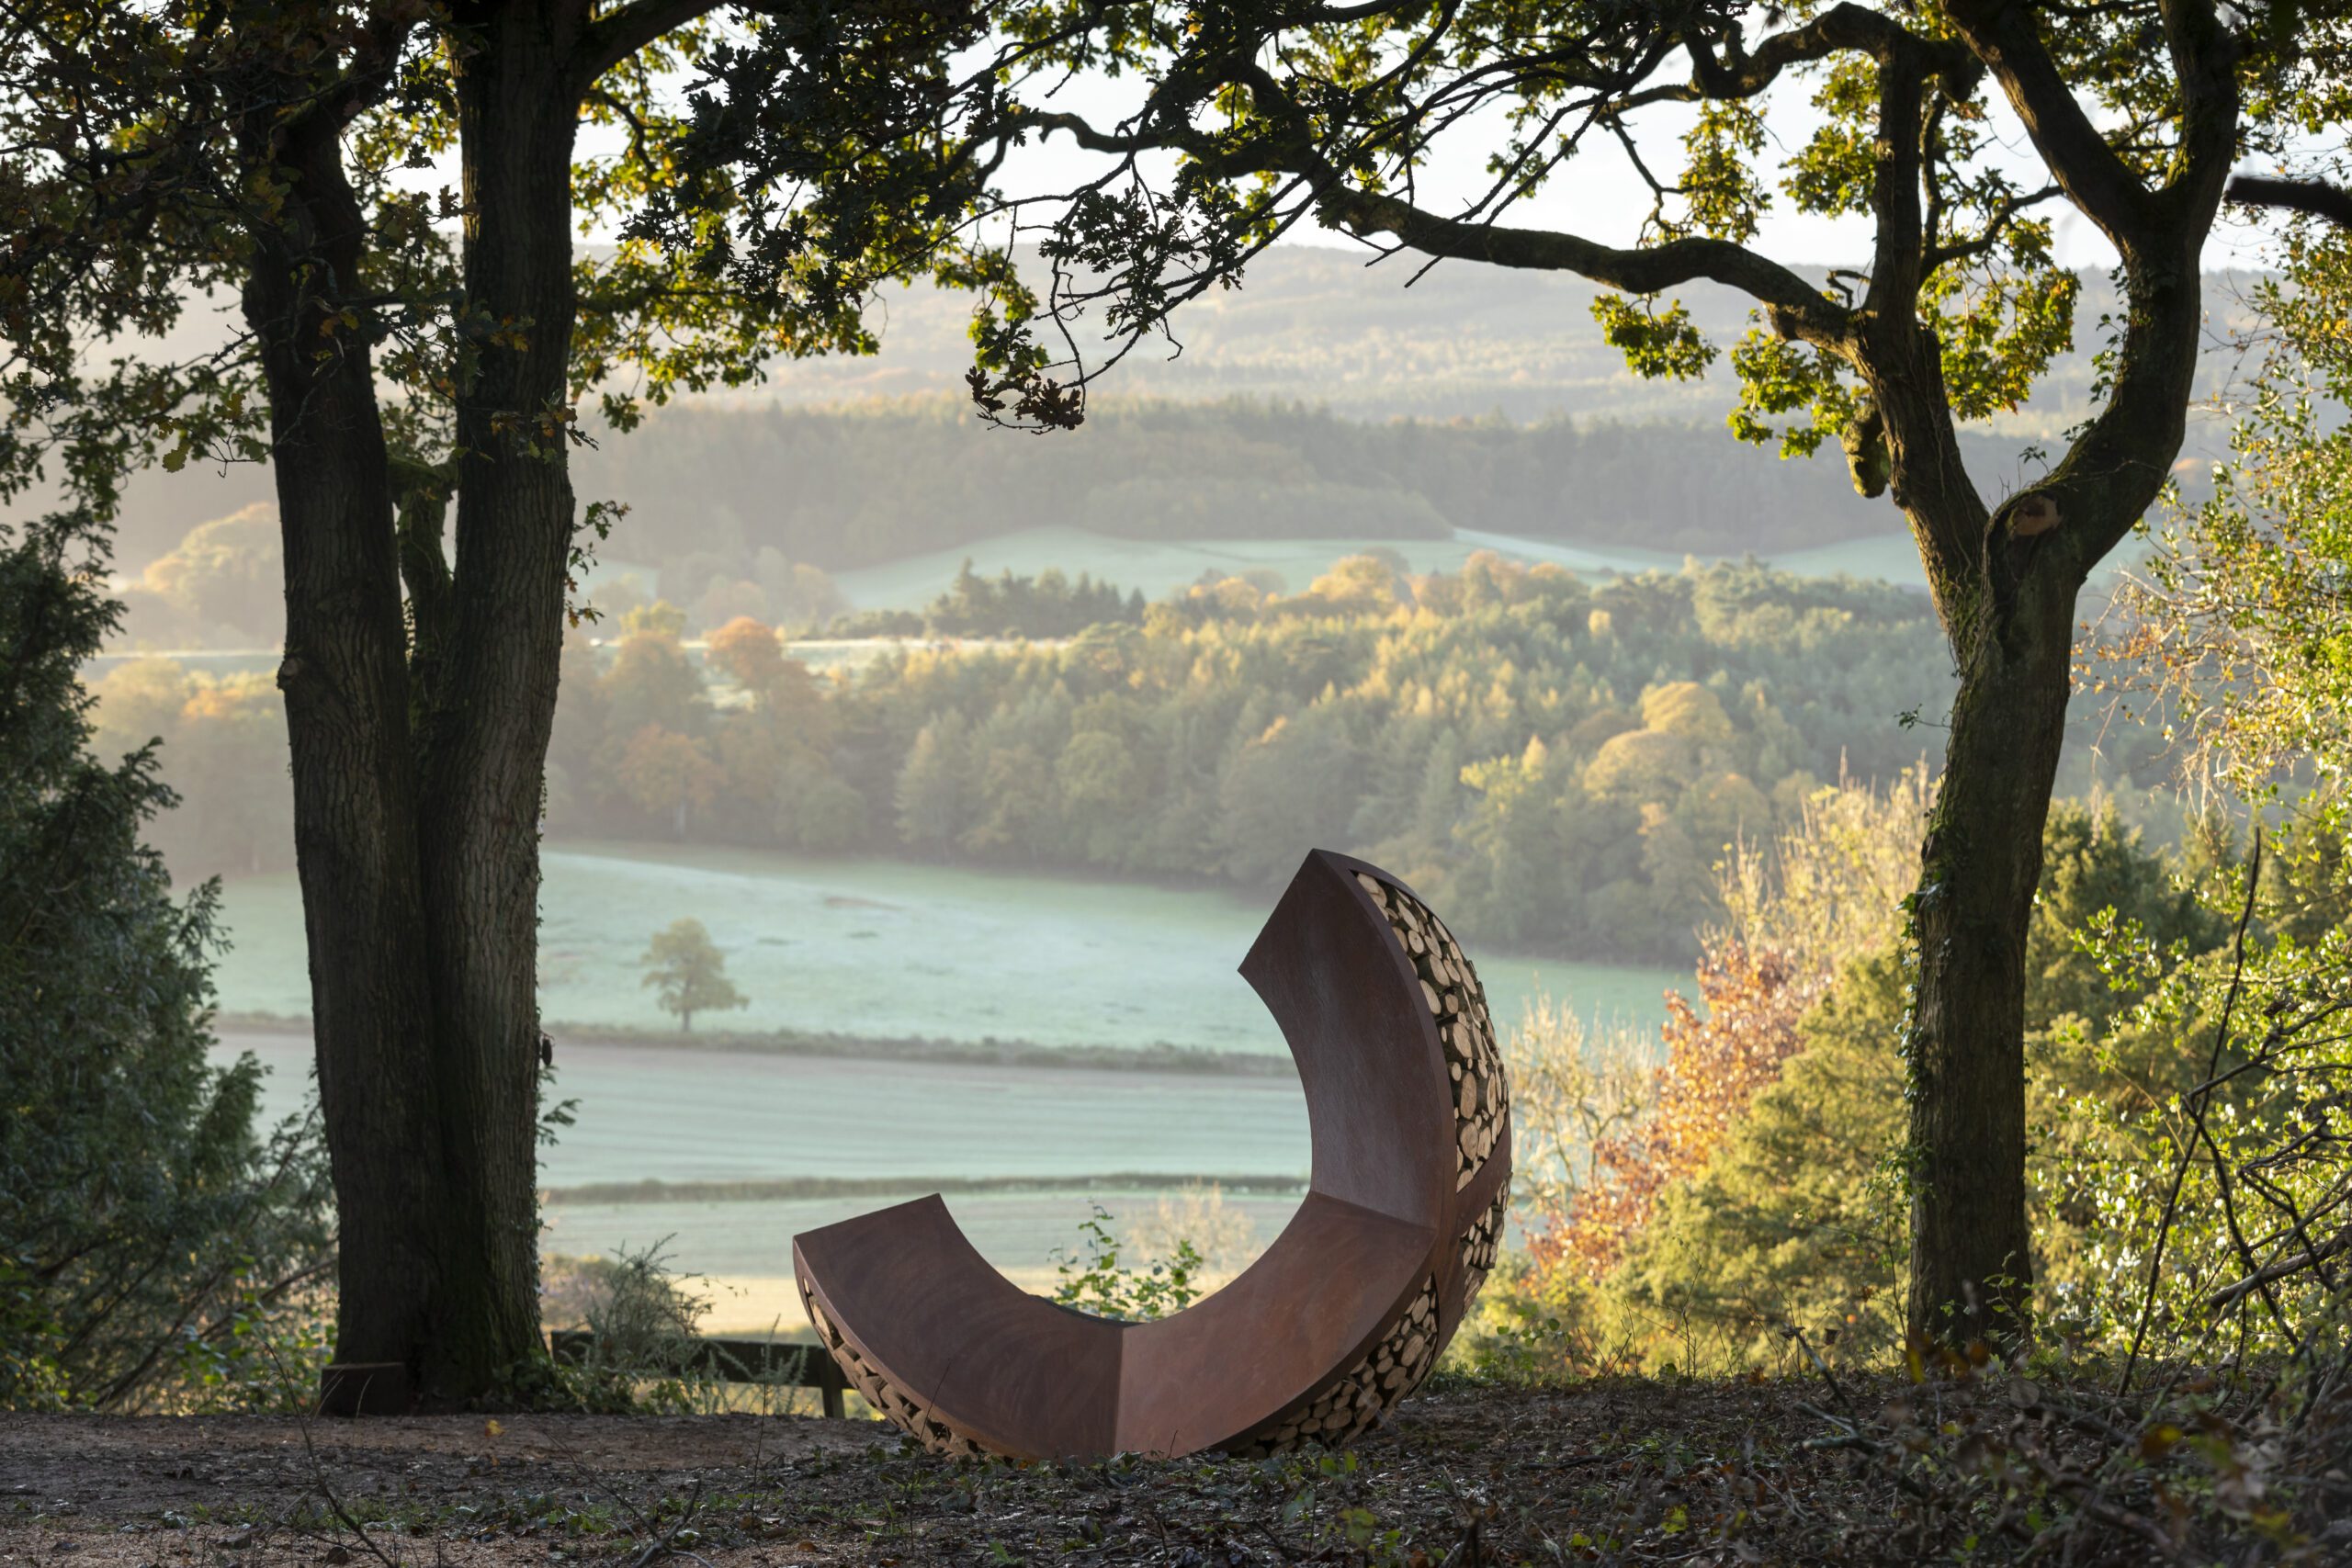 View over Surrey Hills, grass fields and woodland. With Optohedron sculpture in foreground.